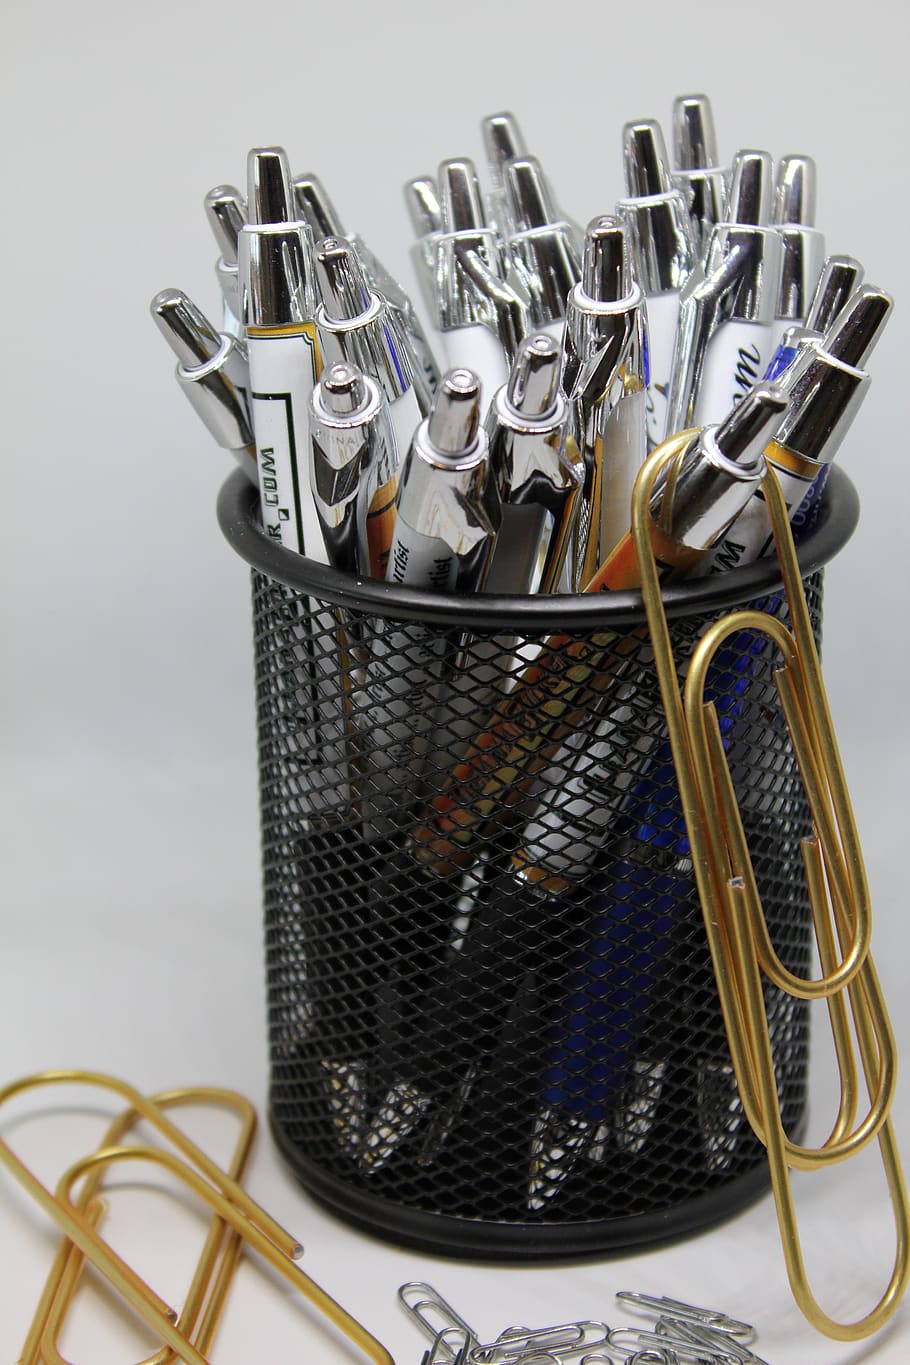 paperclip, pens, holder, clip, office, office accessories, office supplies, office equipment, still life, large group of objects